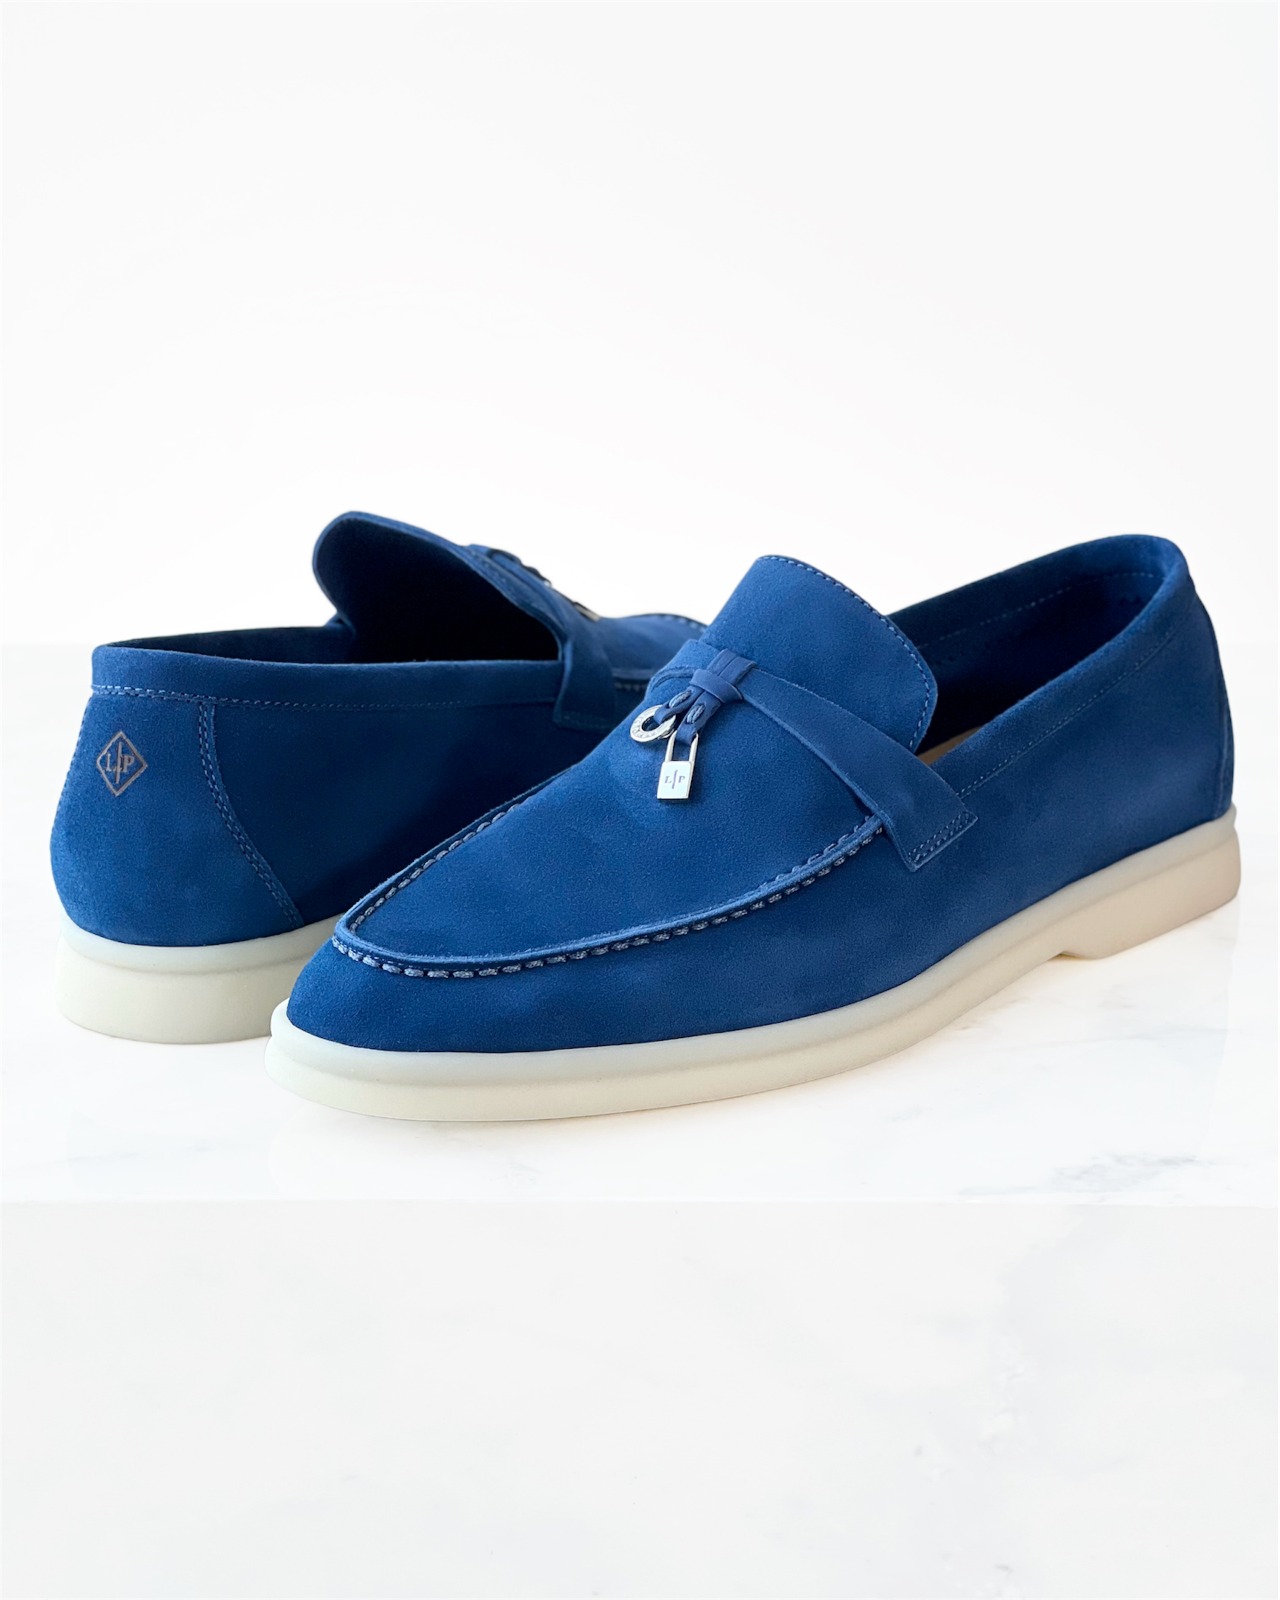 Loro Piana Charms Suede Loafers MILNY PARLON